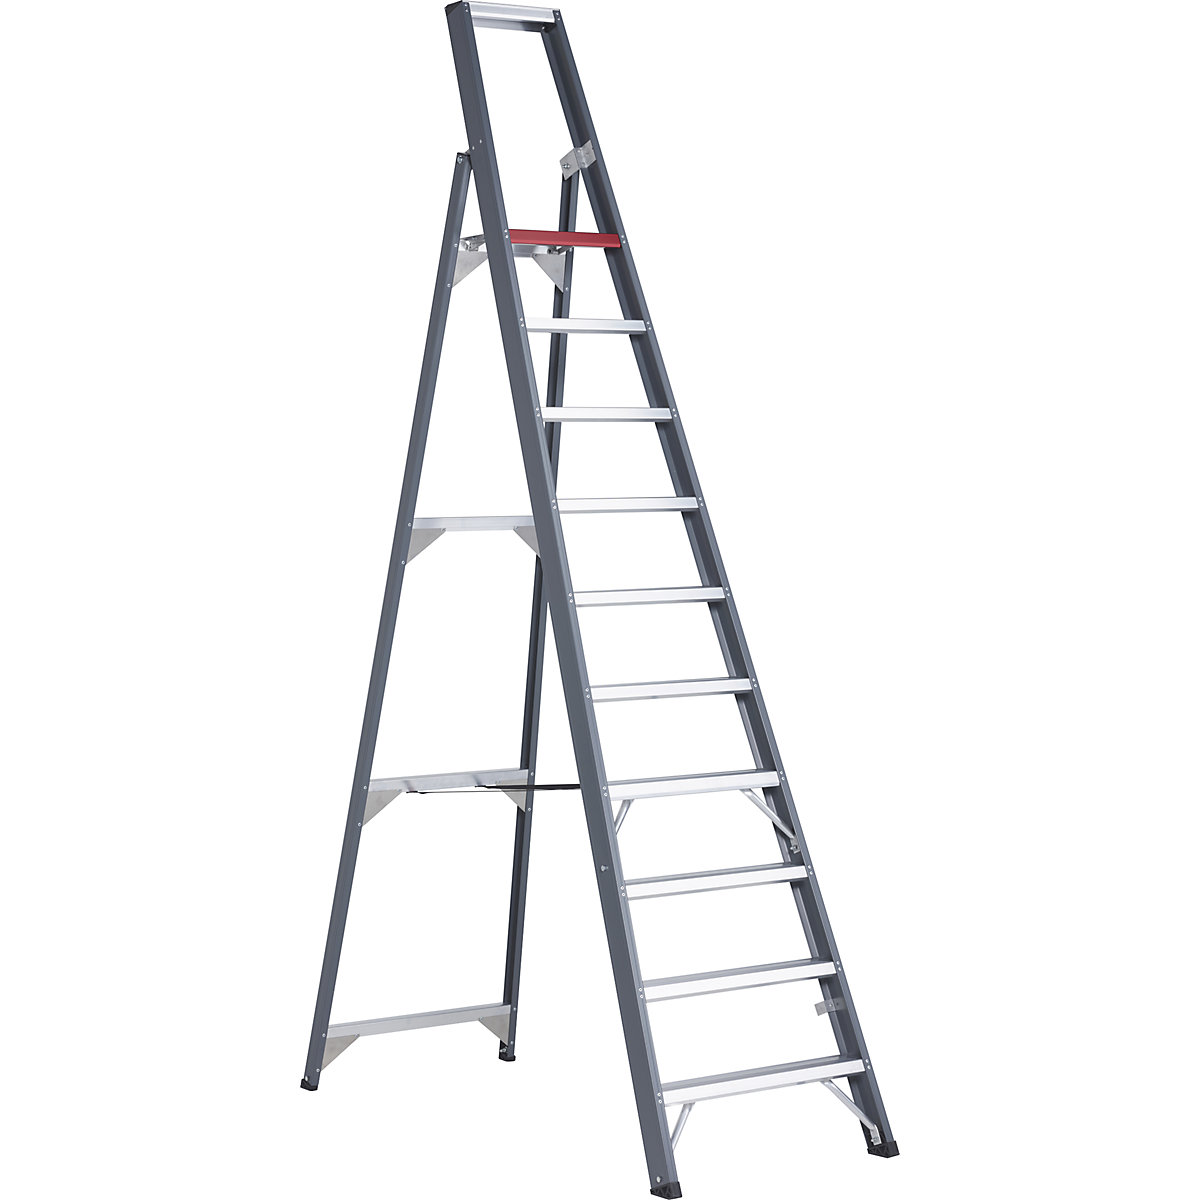 Aluminium step ladder, single sided access – Altrex, with storage tray, 10 steps, working height 4350 mm-7